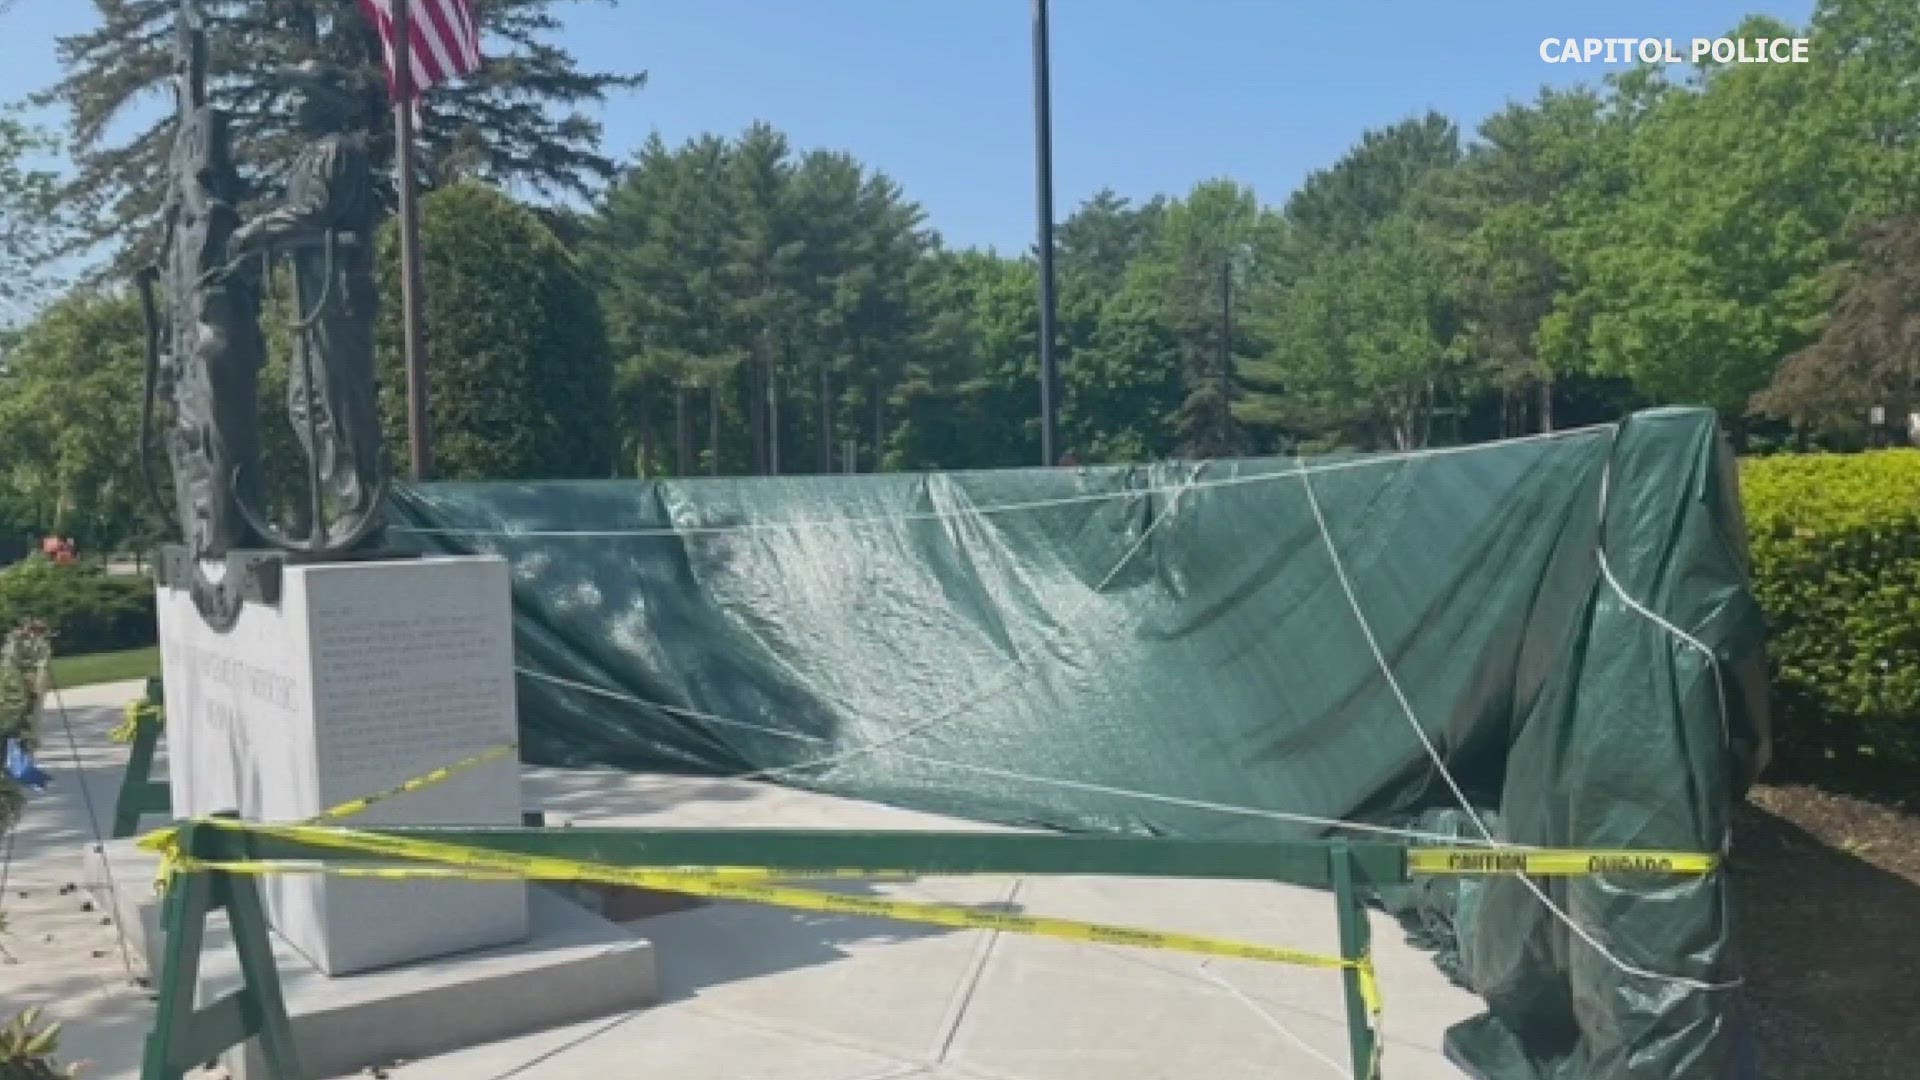 Maine Capitol Police is asking the public to share any information about reported vandalism at the Memorial in Augusta.